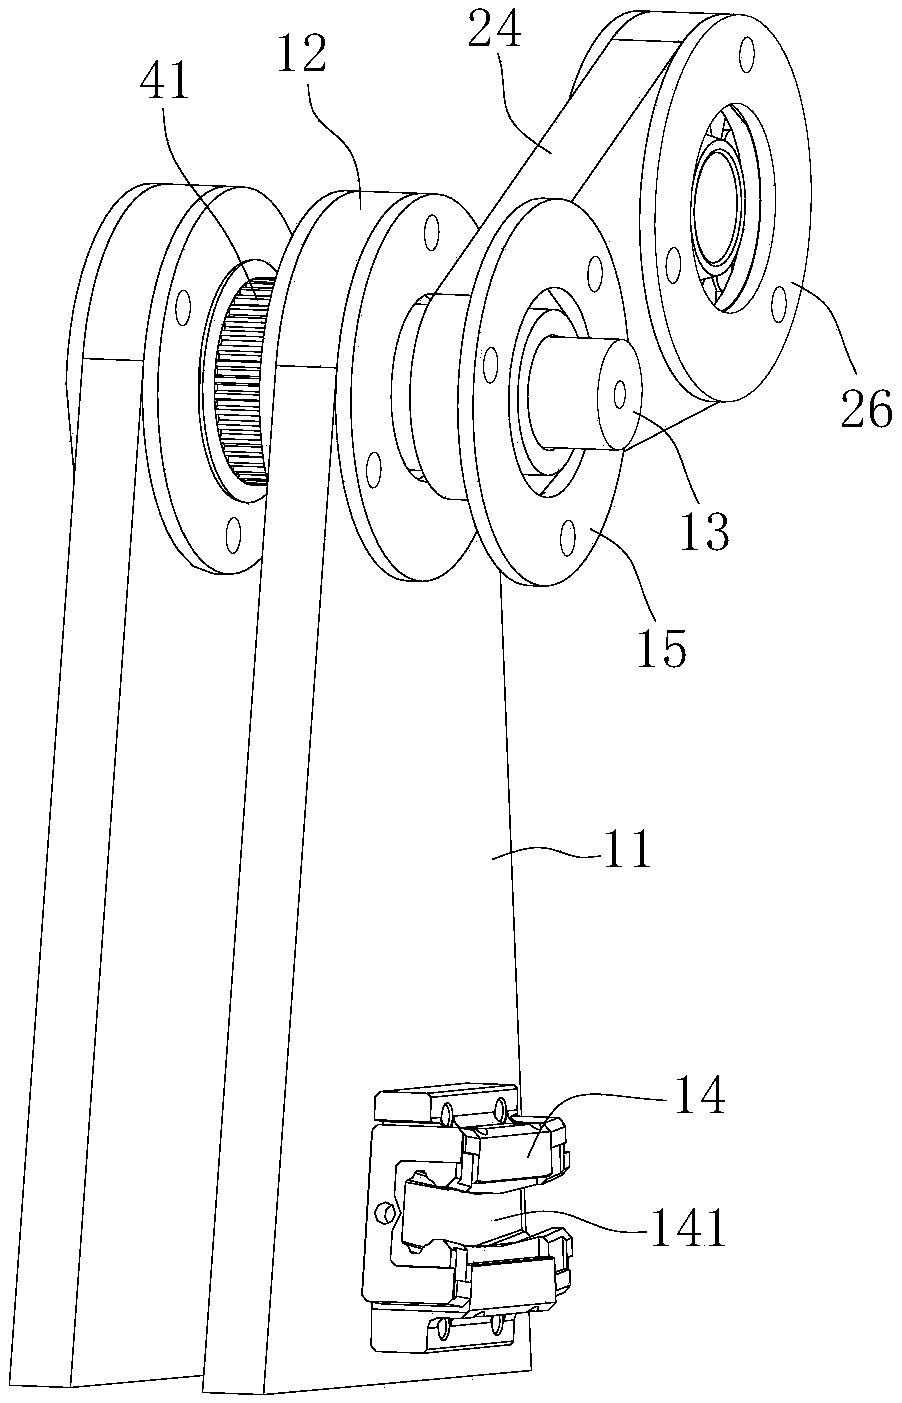 Crank connecting rod mechanism capable of automatic adjustment of length